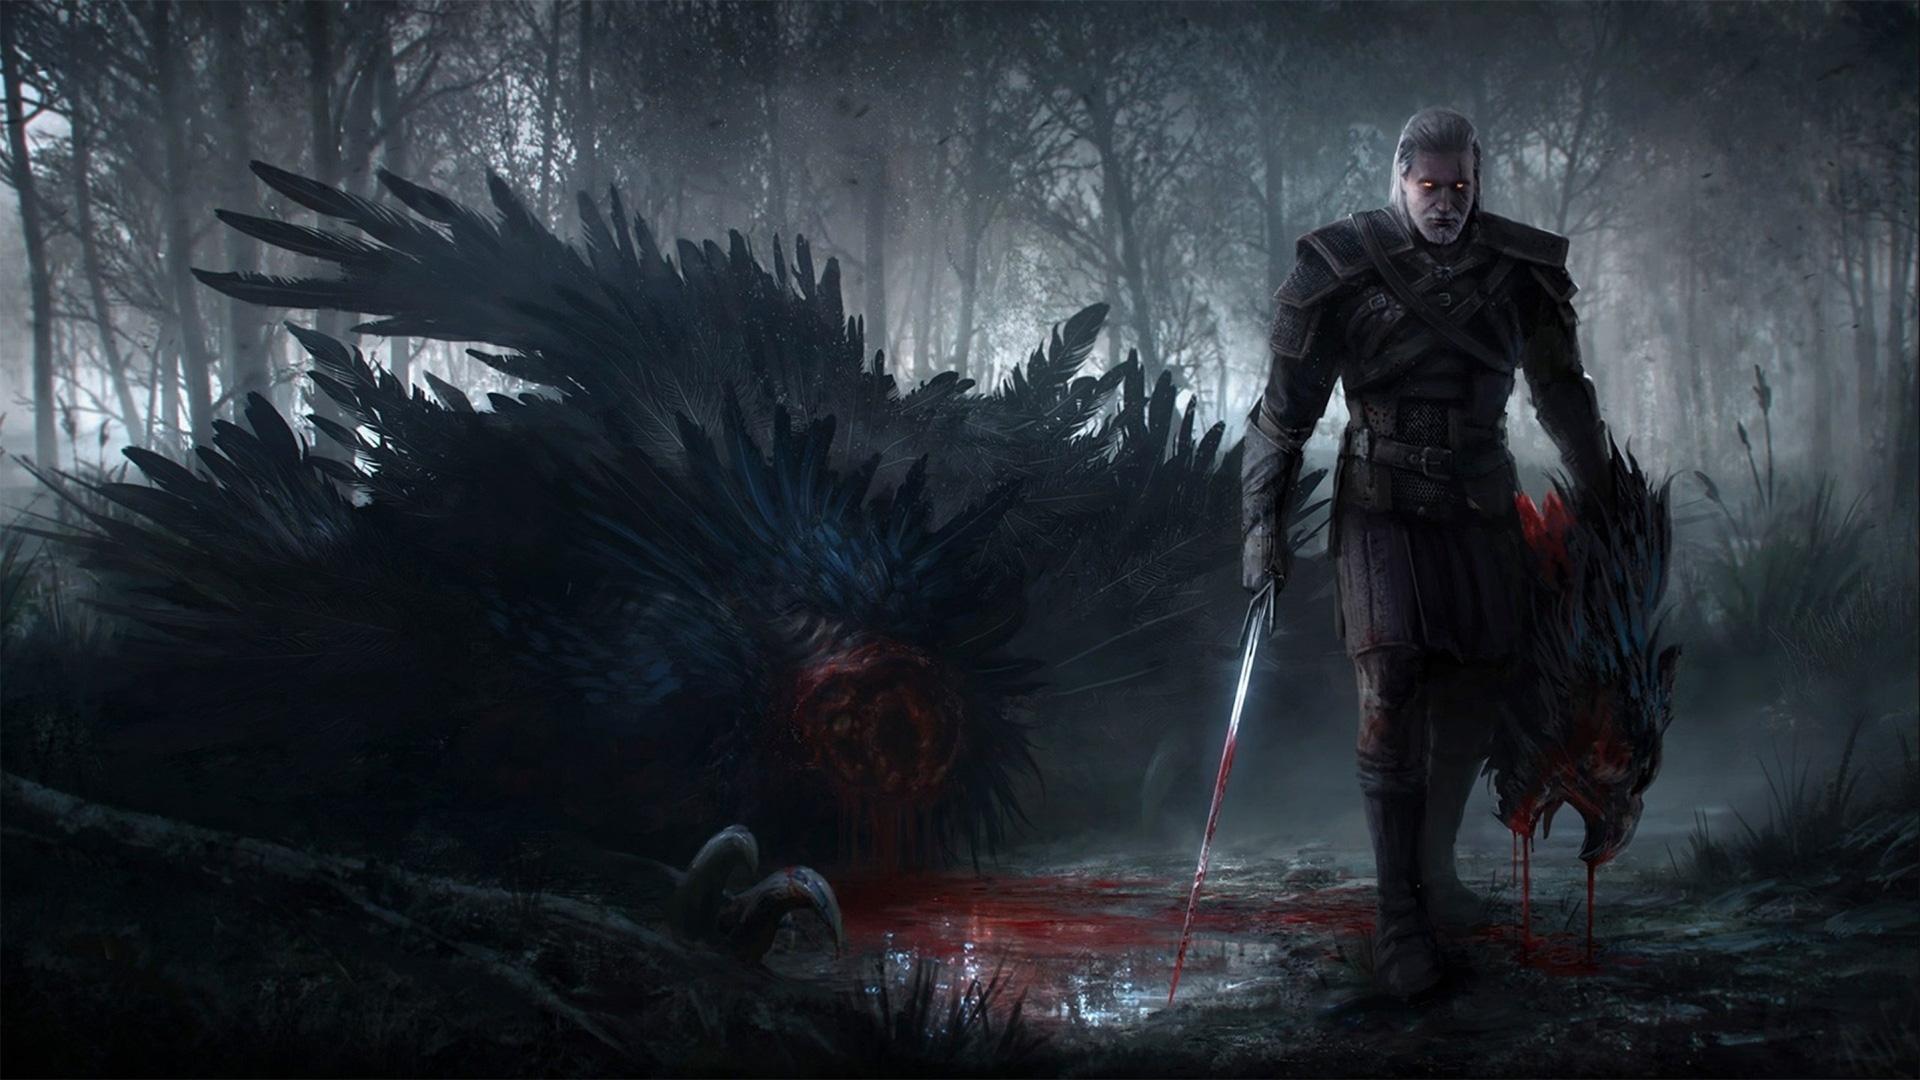 Geralt with a monster's head, Wallpaper from The Witcher 3: Wild